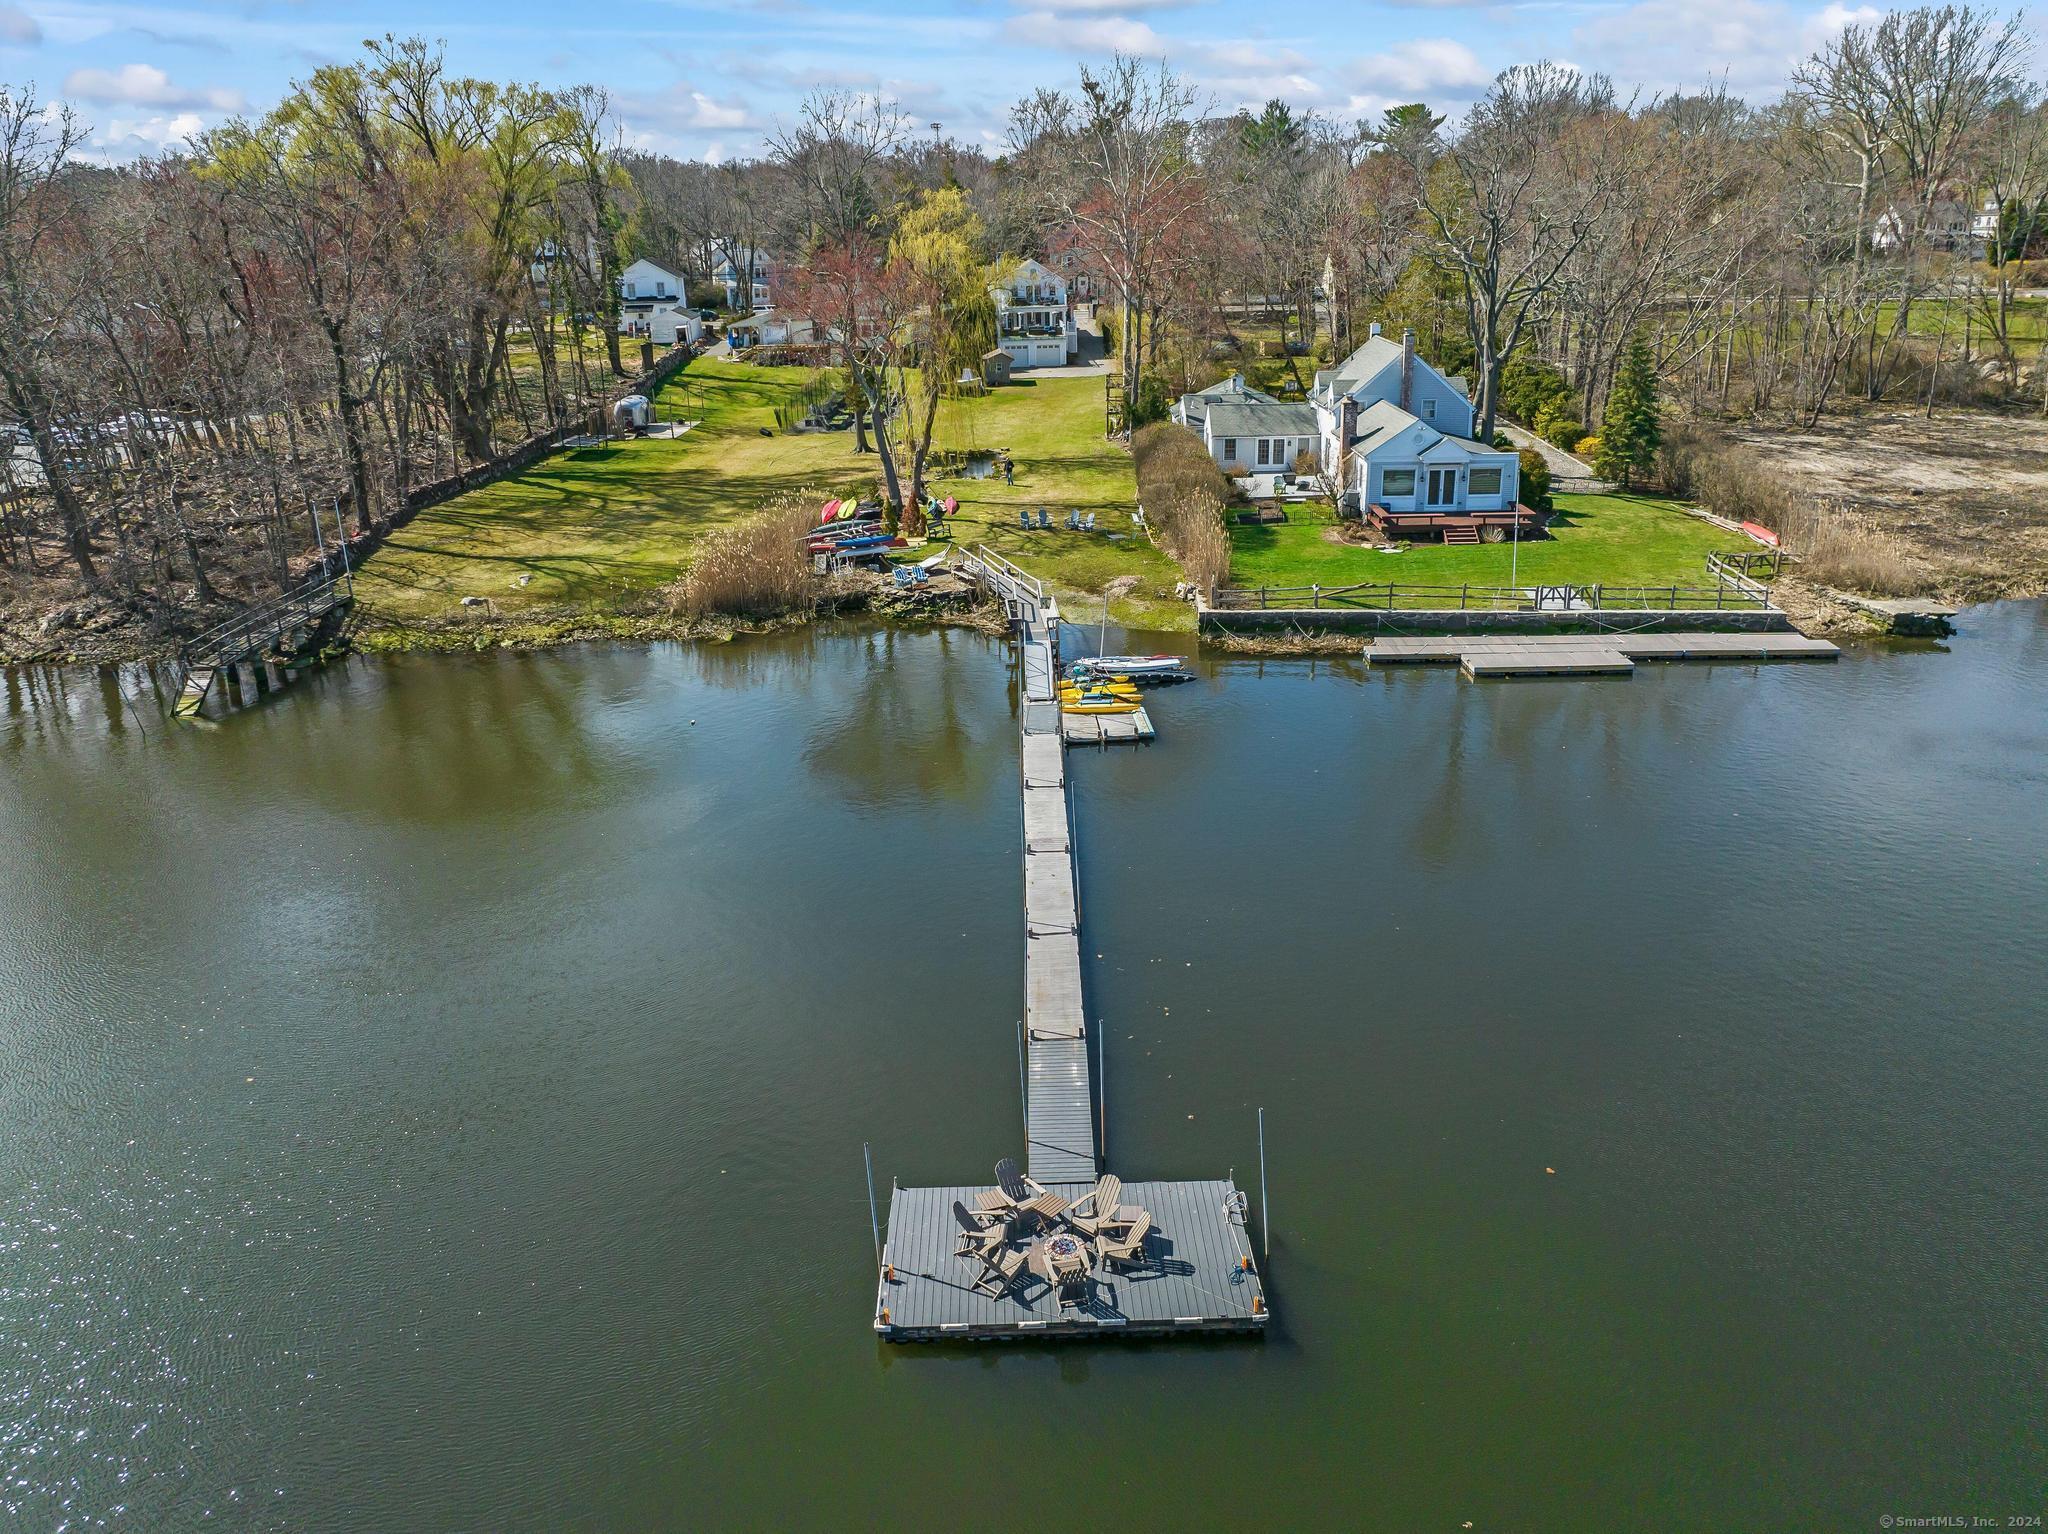 Lovely 2900++ sf waterfront on .49 flat acres sitting on the Saugatuck River. Includes large extended dock, pond and wonderful home with over 50' of water frontage and glass tiered decks. Close to Metro. Enjoy an estate with scenic channel views of rowers gliding along in sync heading to the L.I. Sound, A large yard/dock can anchor several boats. Enjoy Duck/Koi pond and big yard. Designed to combine old with new includes 4 bedrooms & 4 baths. Circa 1860 facade joins a modern bright floorplan with glass wall to the great tiered decks. The Primary en Suite bedroom boasts cathedral 14' ceilings - extensive views of the River. walk out veranda, seating, hot tub and log or gas fireplace for a quiet evenings. Nursery or office. Kitchen has a gas stove and opens to the living & dining area. A wonderful large brick fireplace ads ambiance & French doors open to covered deck. Romantic private dining room and parlor/library. Guest/Au Pair quarters & bath. Bonus finished lower level has 4rth bedroom, sitting area, bath & exit. Dock is situated for motor boat, kayaks & dock parties with ample room to BBQ or relax in the deck hot tub. This farmhouse has built to meet today's modern lifestyle while keeping the integrity of its Westport History. Large 2 car garage & work shop. Very close distance to all - Golf, Tennis, Rowing, TOP restaurants, Compo Beach and Longshore Club. Train 5 minutes. No flood Ins. Just move in. Summer oasis awaits. By Appointment.